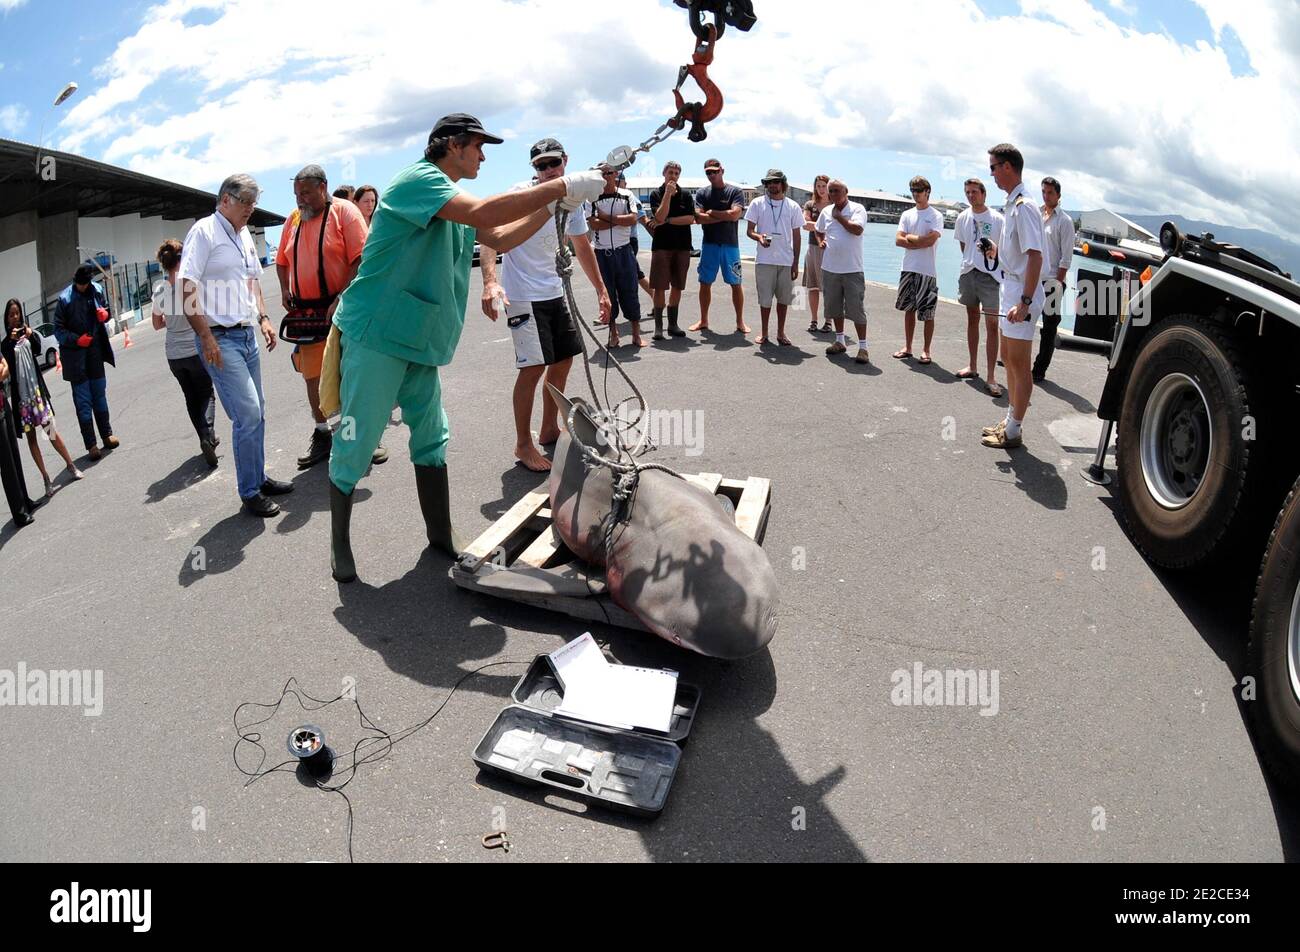 The shark, of 156 kg and 1m50 long, was captured by fishermen after the prefect Michel Lalande had asked for a report sampling conditions concerning the dangerous unprotected species of sharks, following the death on September 19, 2011 of former bodyboarding champion Mathieu Schiller who was victim of a shark attack in French overseas department La Reunion, France on September 29, 2011. Photo by Serge Leplege/ABACAPRESS.COM Stock Photo